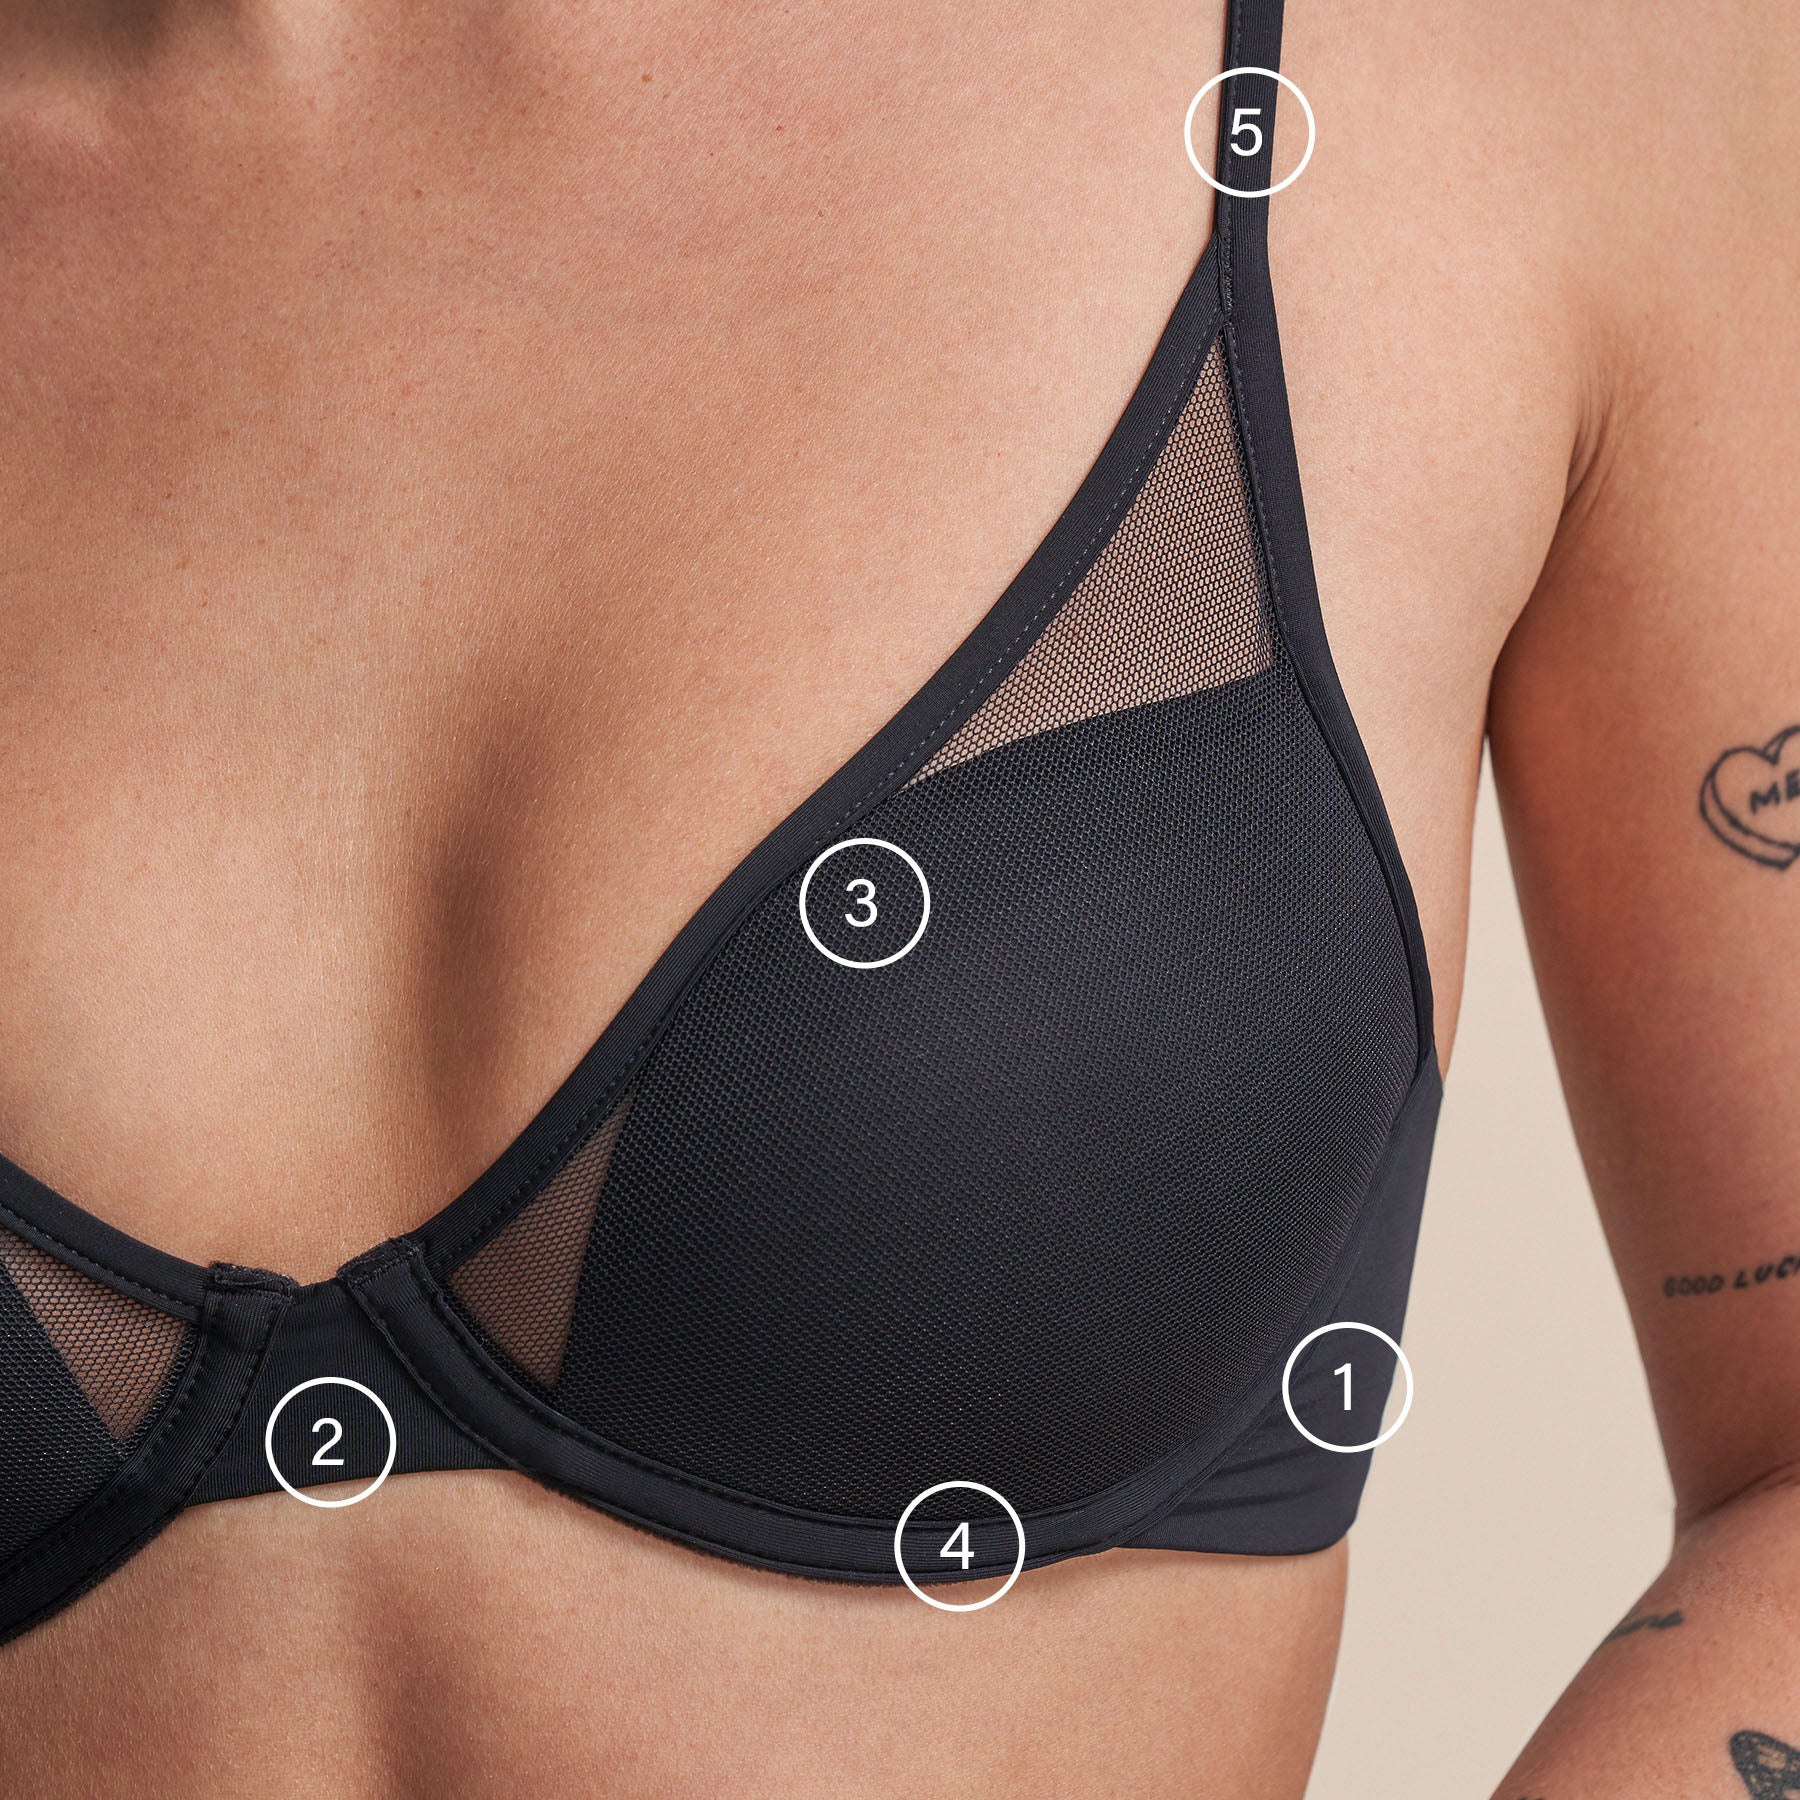 ad Finallyyyy a bra made to fit small boobs! @wearpepper has bras